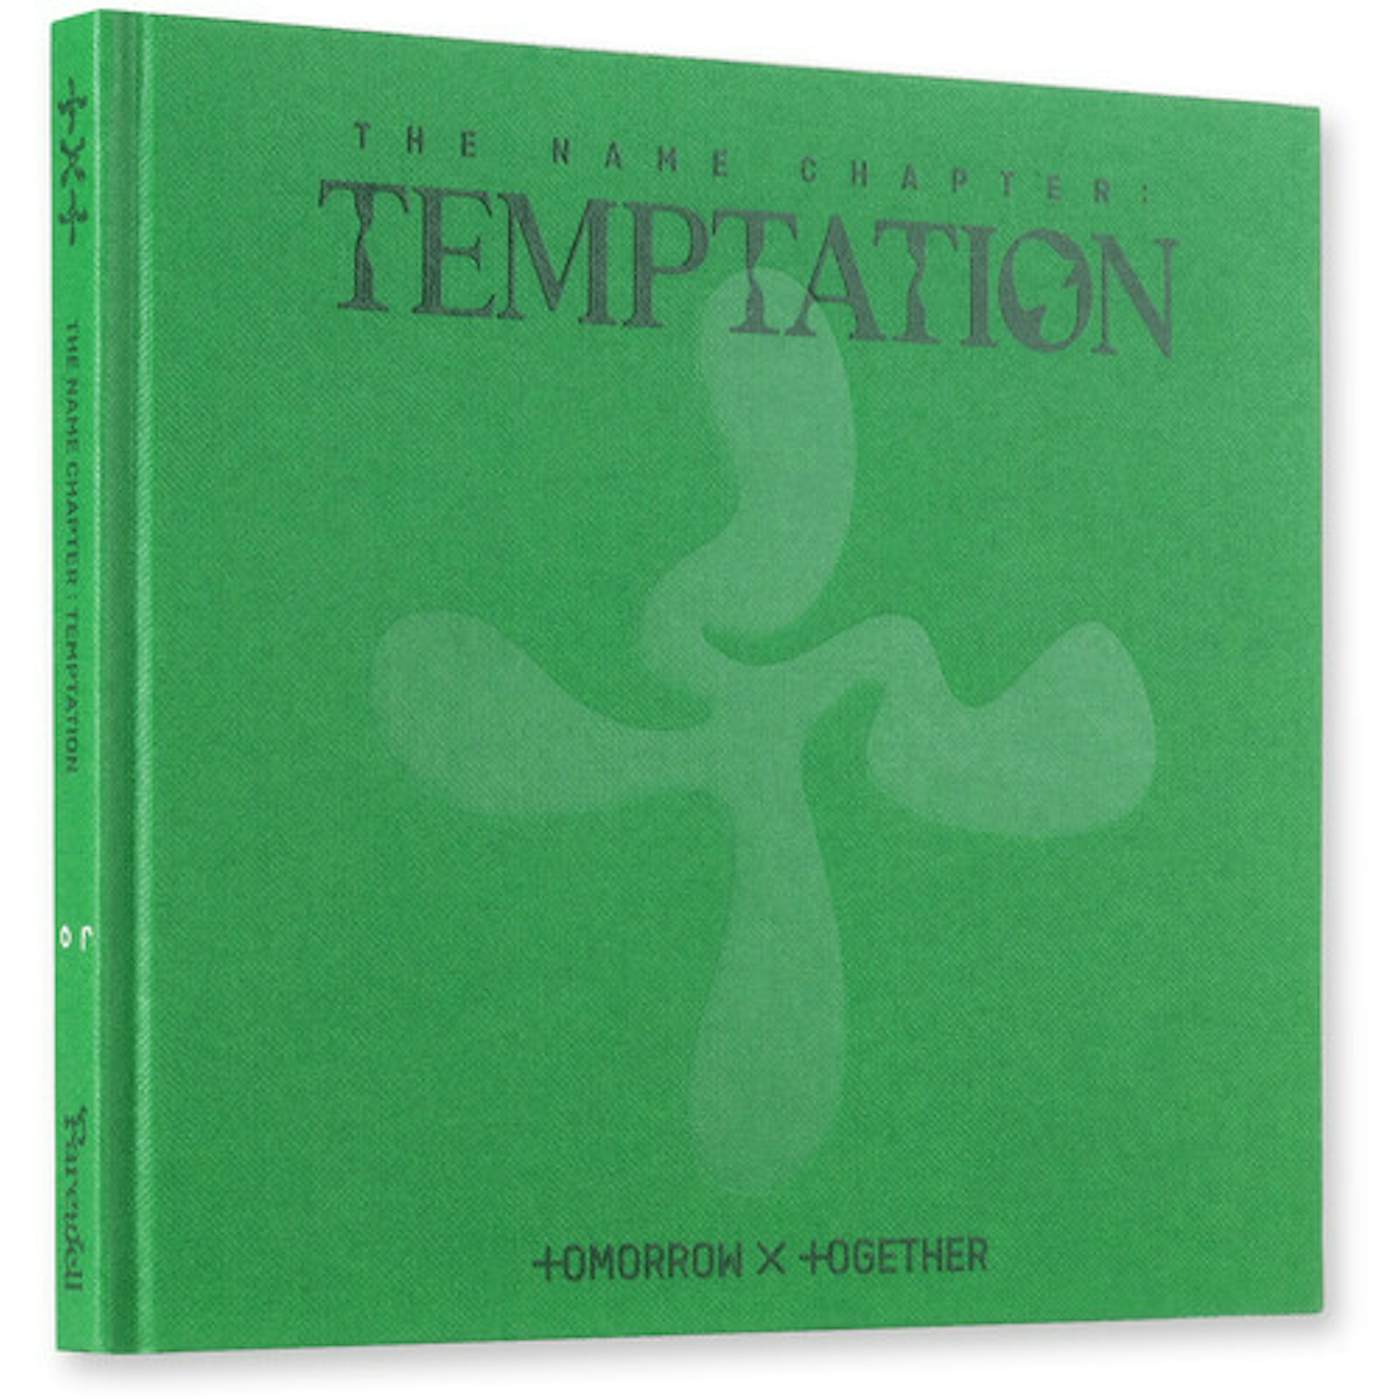 TOMORROW X TOGETHER NAME CHAPTER: TEMPTATION (FAREWELL) CD